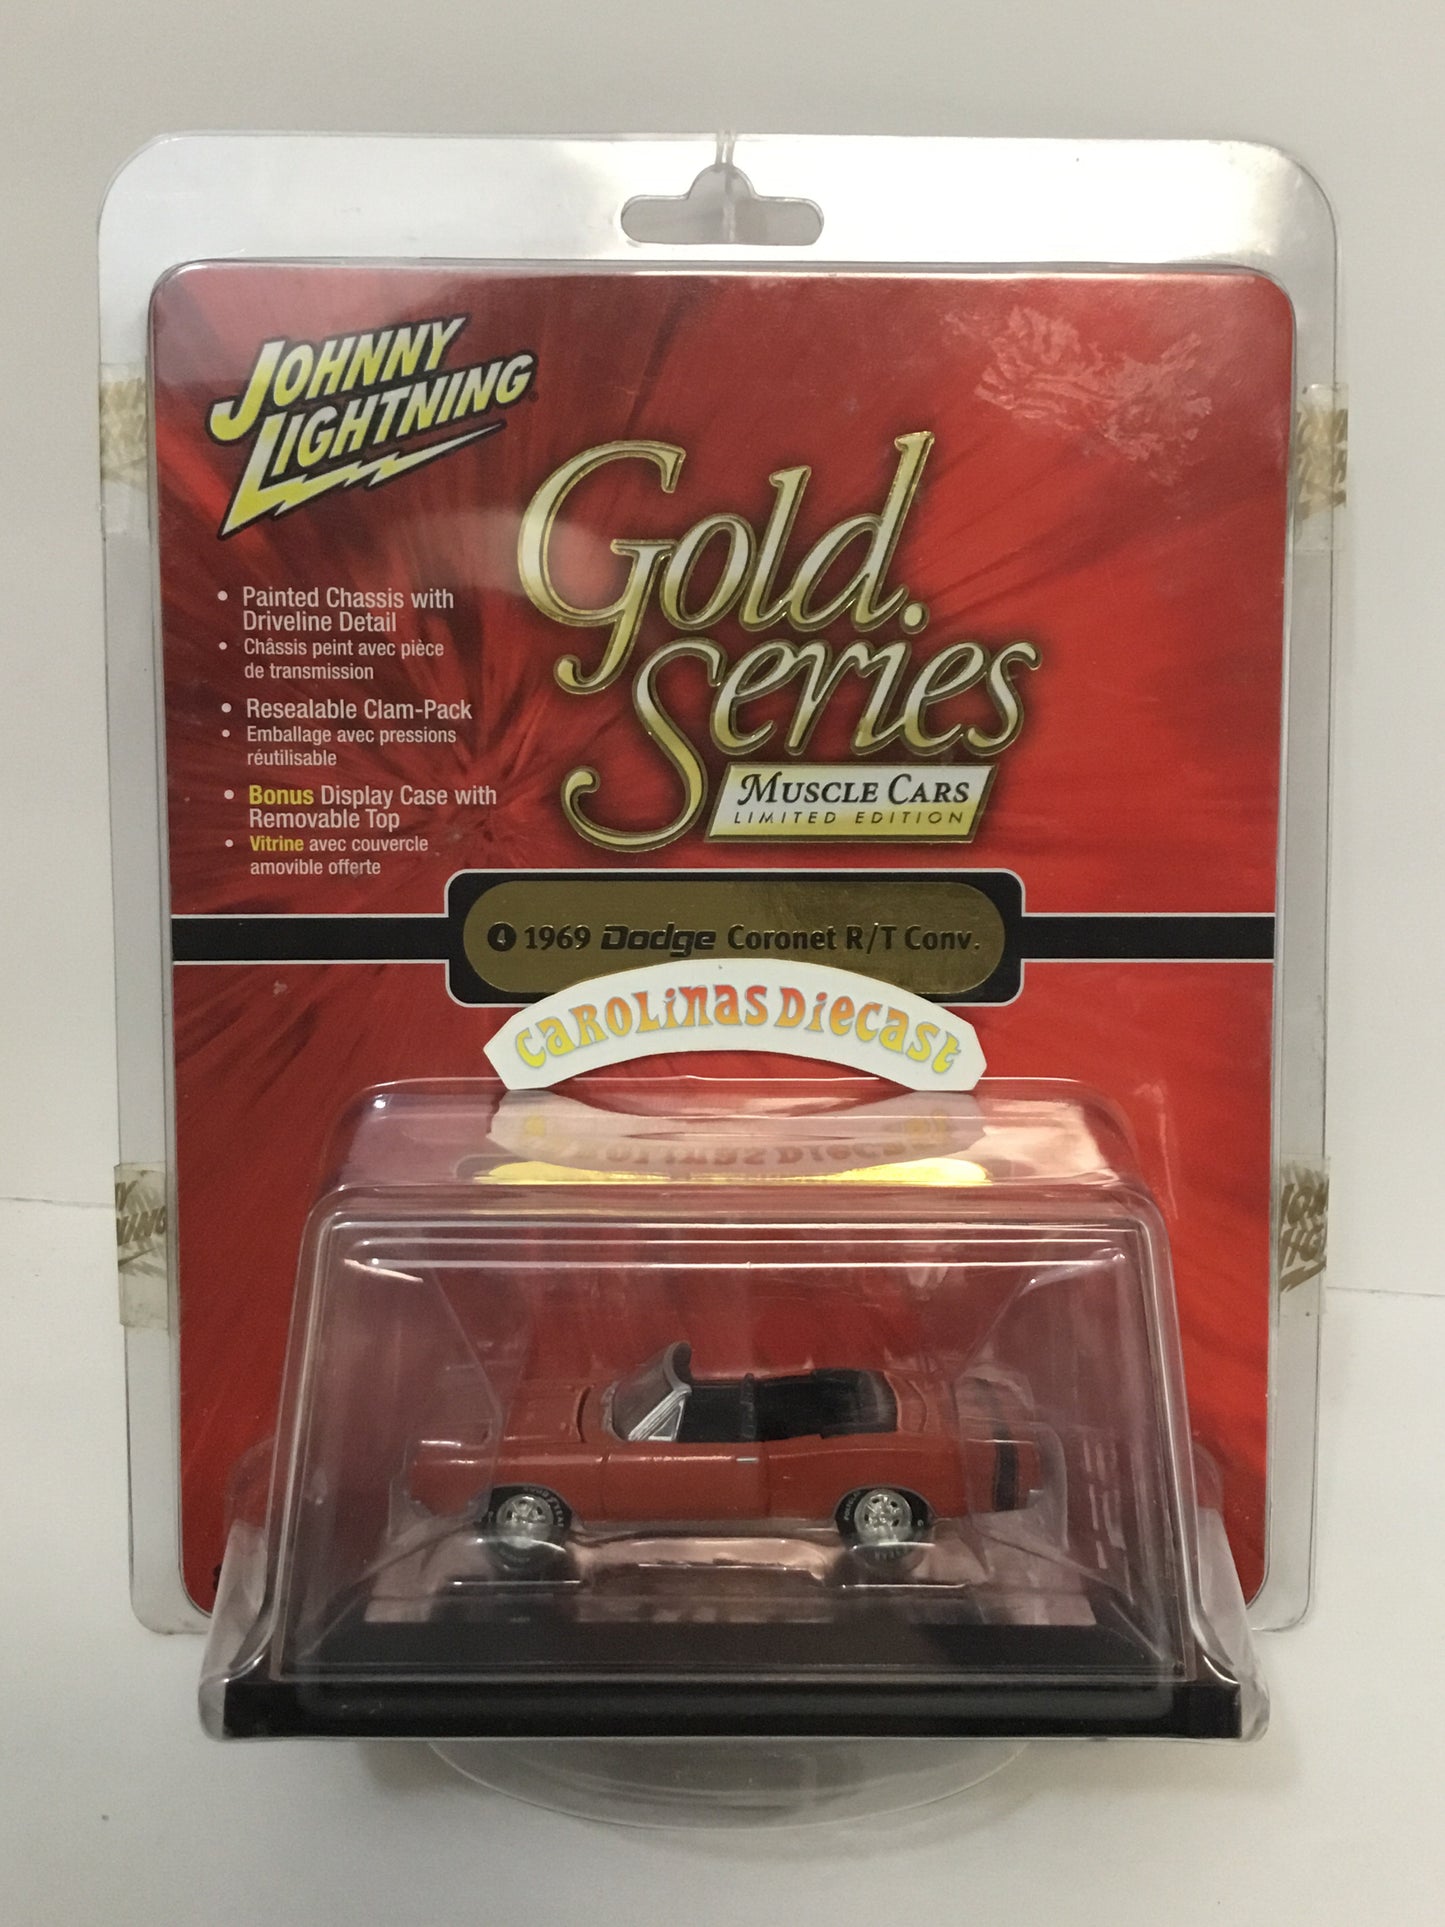 Johnny Lightning Gold series muscle cars 1969 dodge coronet R/T convertible (6B5)